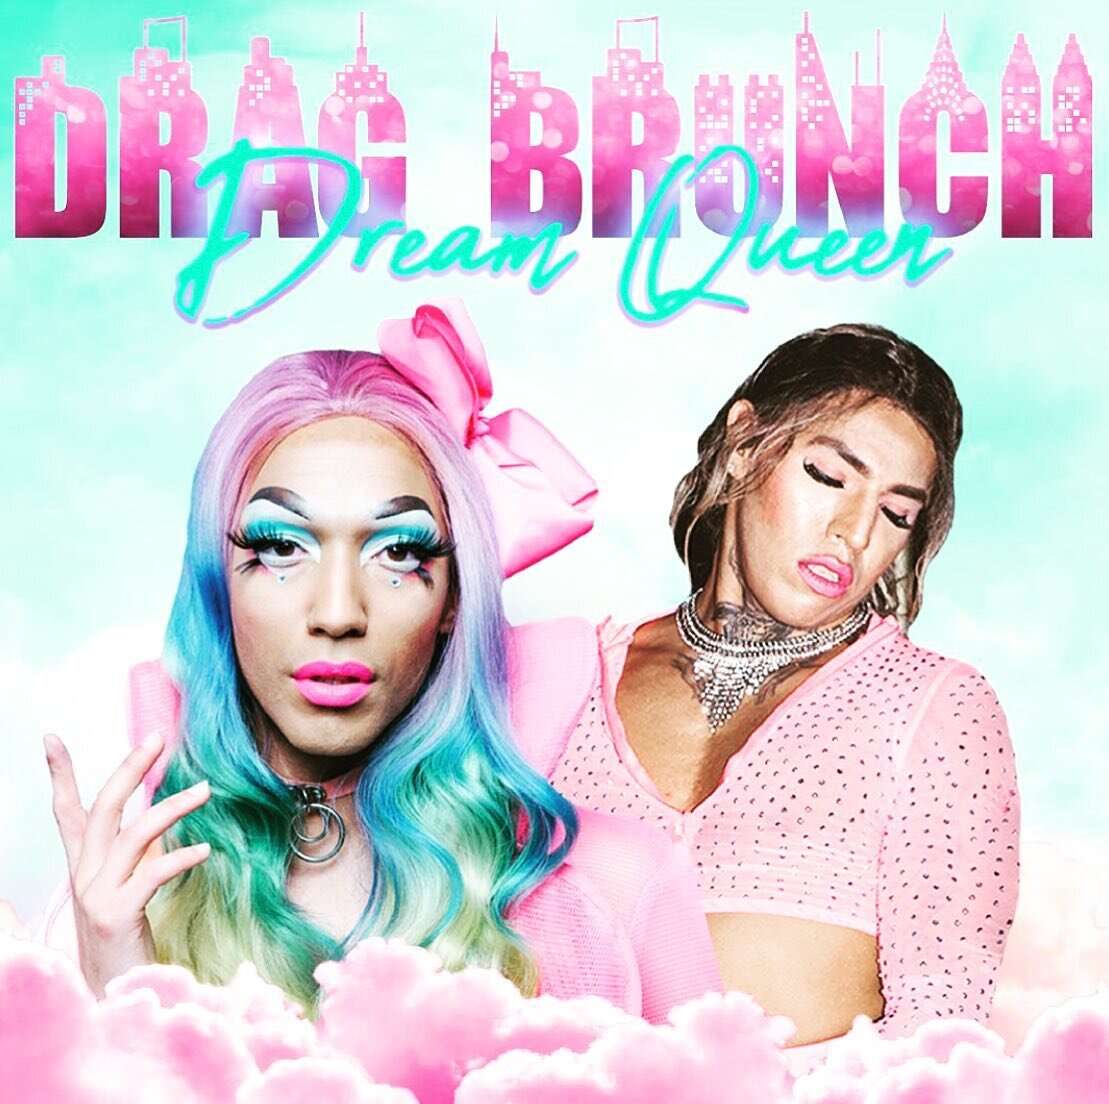 To celebrate #pridemonth Queen is hosting a DRAG BRUNCH 🥂💖🌈
Sunday&rsquo;s- shows at 1 &amp; 3
Ticket link in bio 
happy #pride baby ! ! 🏳️&zwj;⚧️🏳️&zwj;🌈

&ldquo;Rub the weekend pixie dust from your eyes (and nose) and get up to experience you